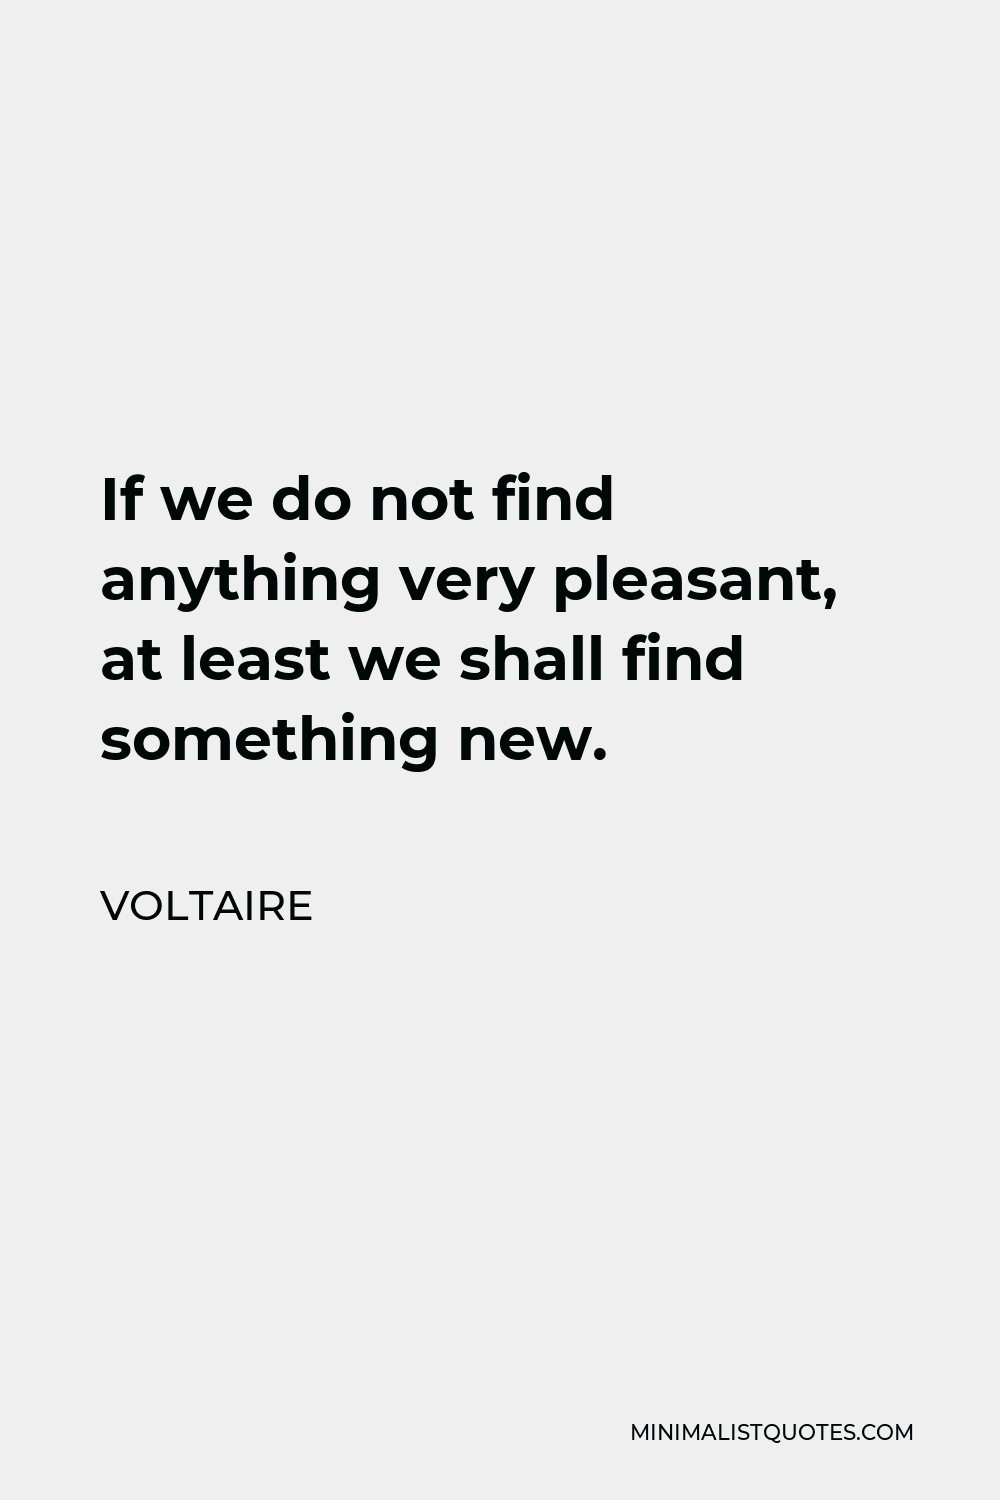 Voltaire Quote - If we do not find anything very pleasant, at least we shall find something new.